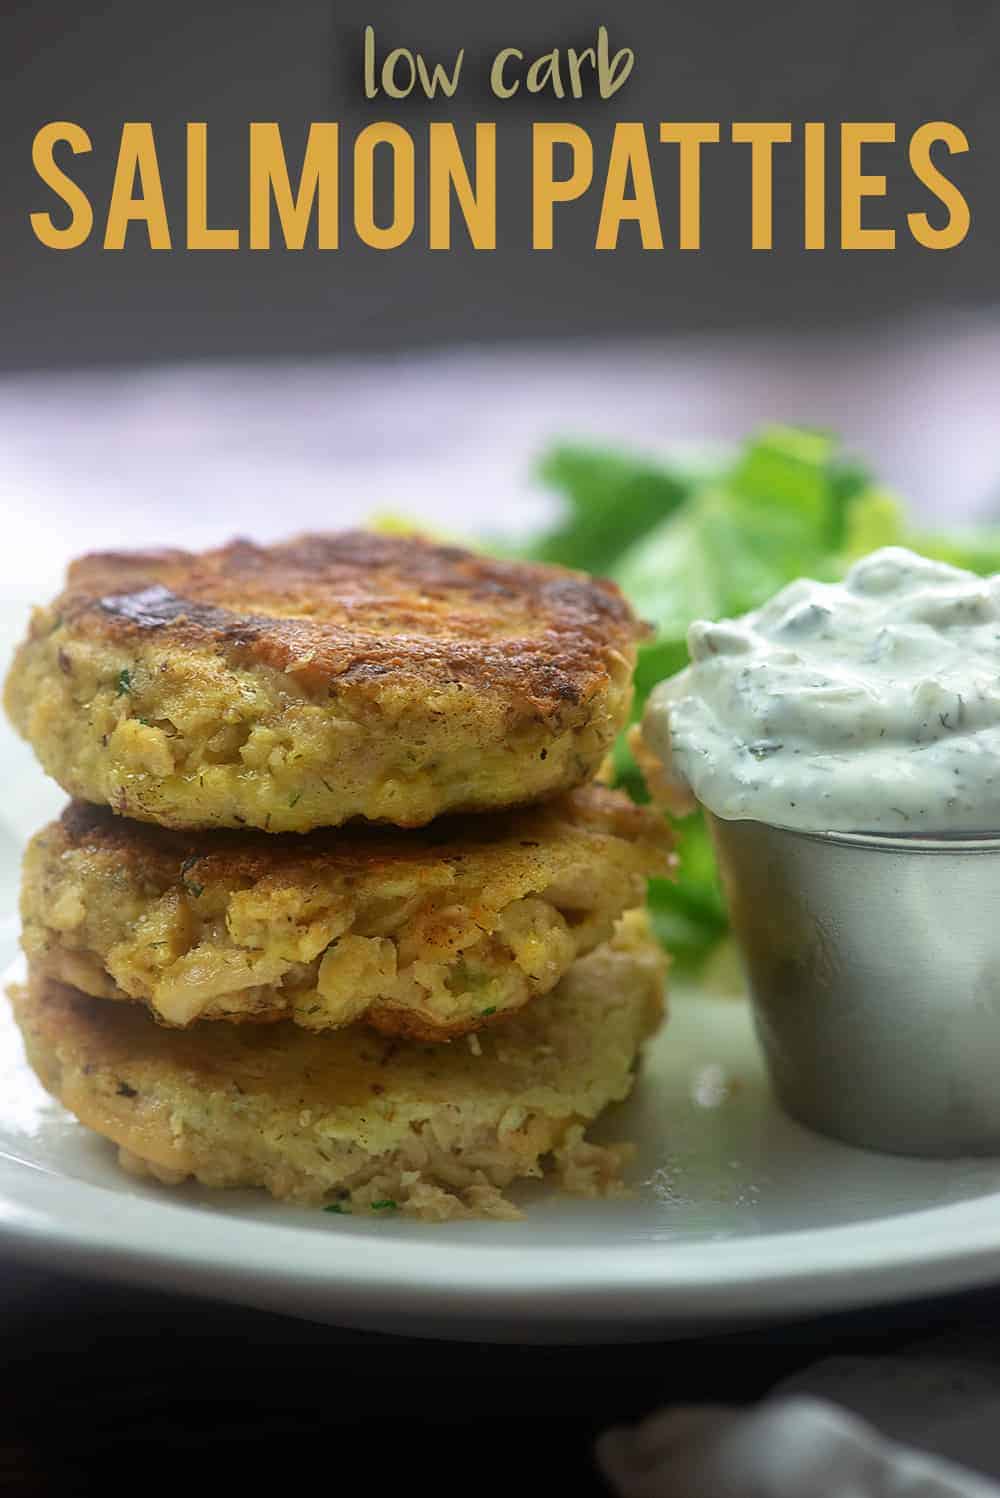 Low carb salmond patties on a plate with tartar sauce.